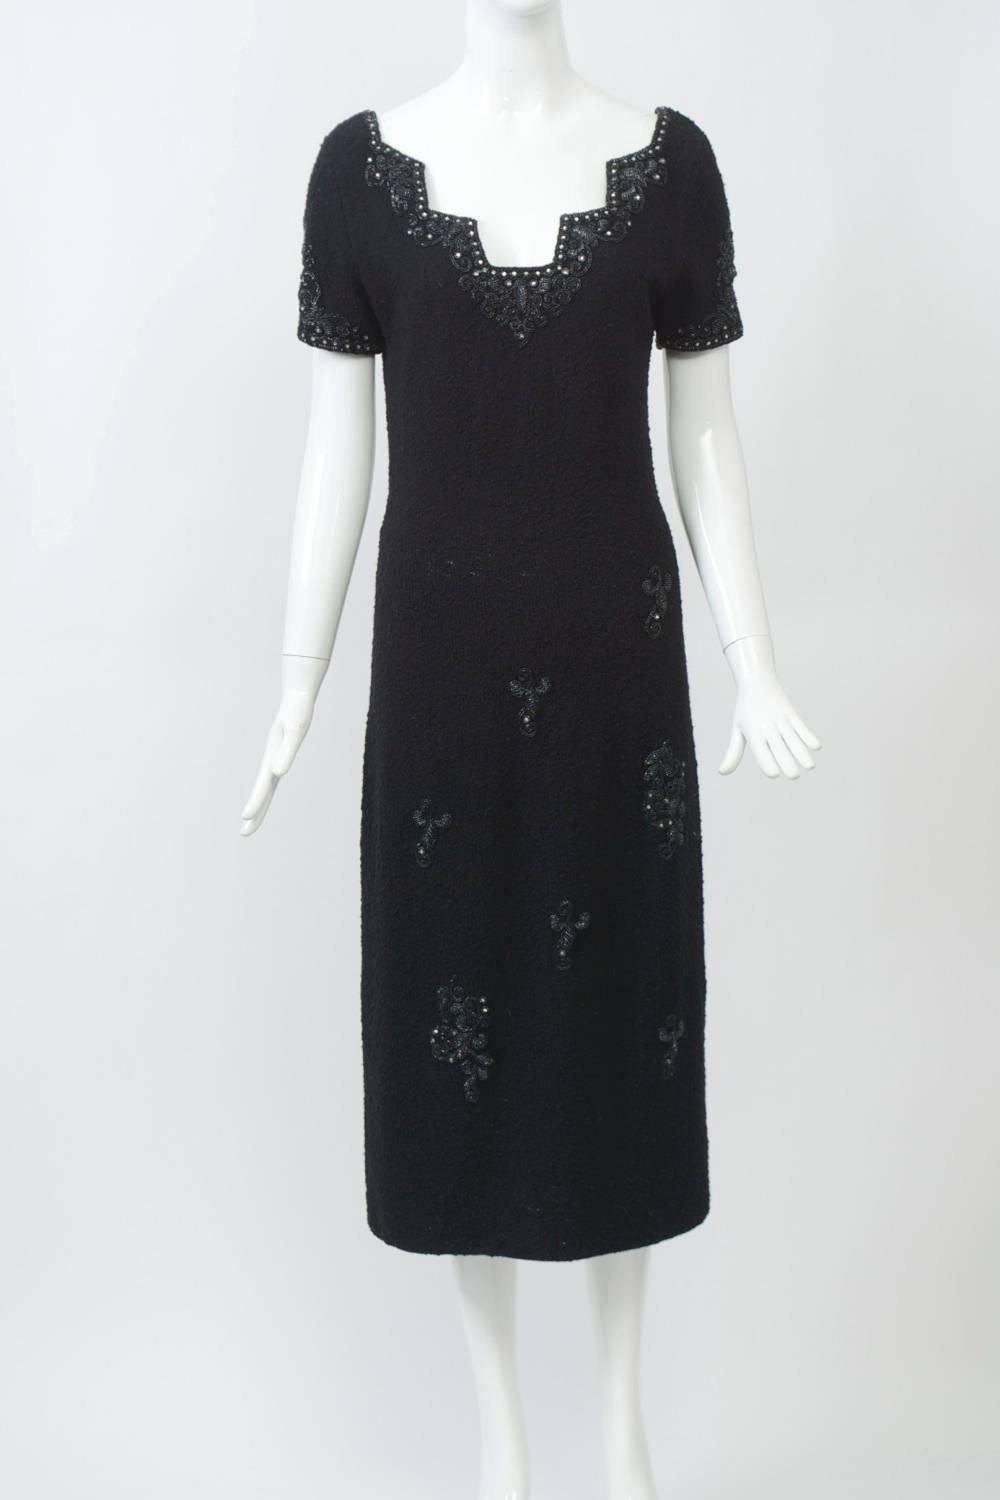 An example of the wonderful knits produced in Hong Kong during the 1950s-'60s, many with unusual features. This dress, slim fitting and body hugging, has an unusual neckline with rectangular cut-ins bordered with rhinestone and beaded embellishment,